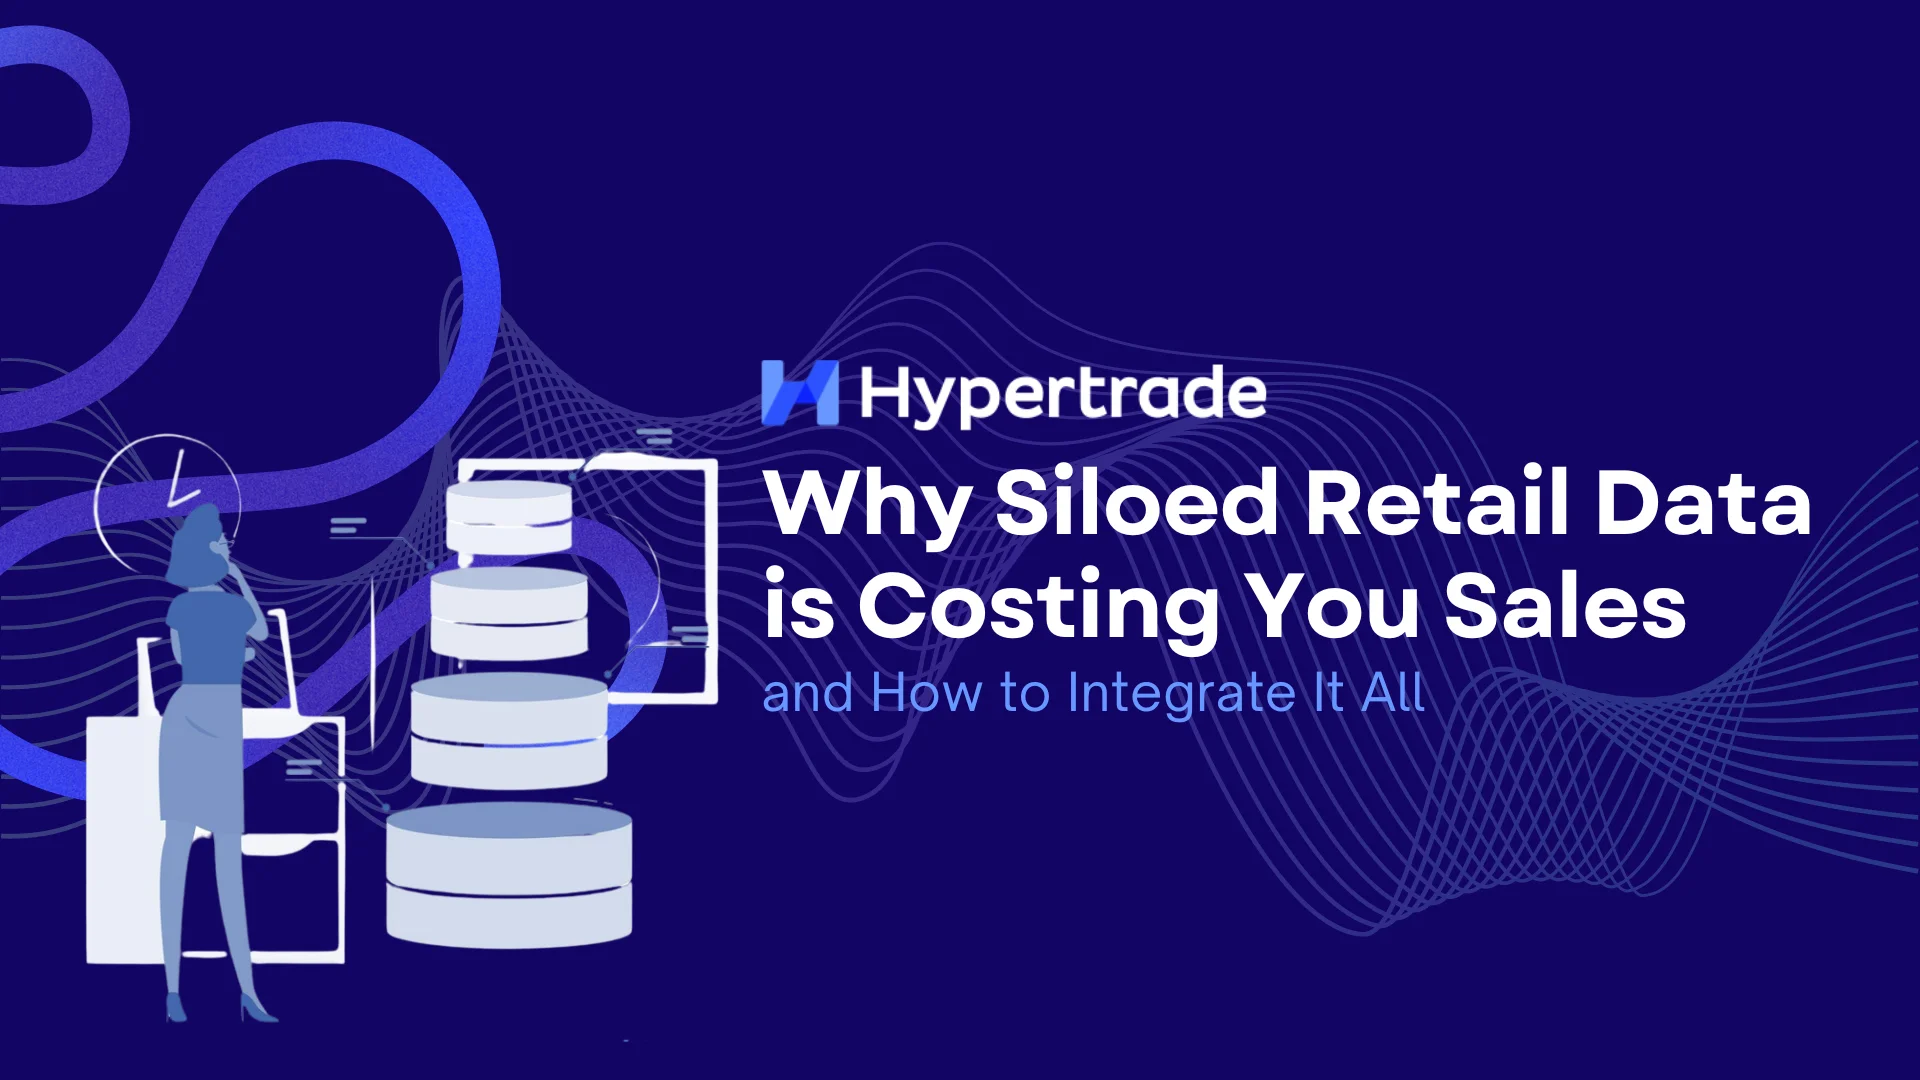 Why Siloed Retail Data is Costing You Sales (and How to Integrate It All)